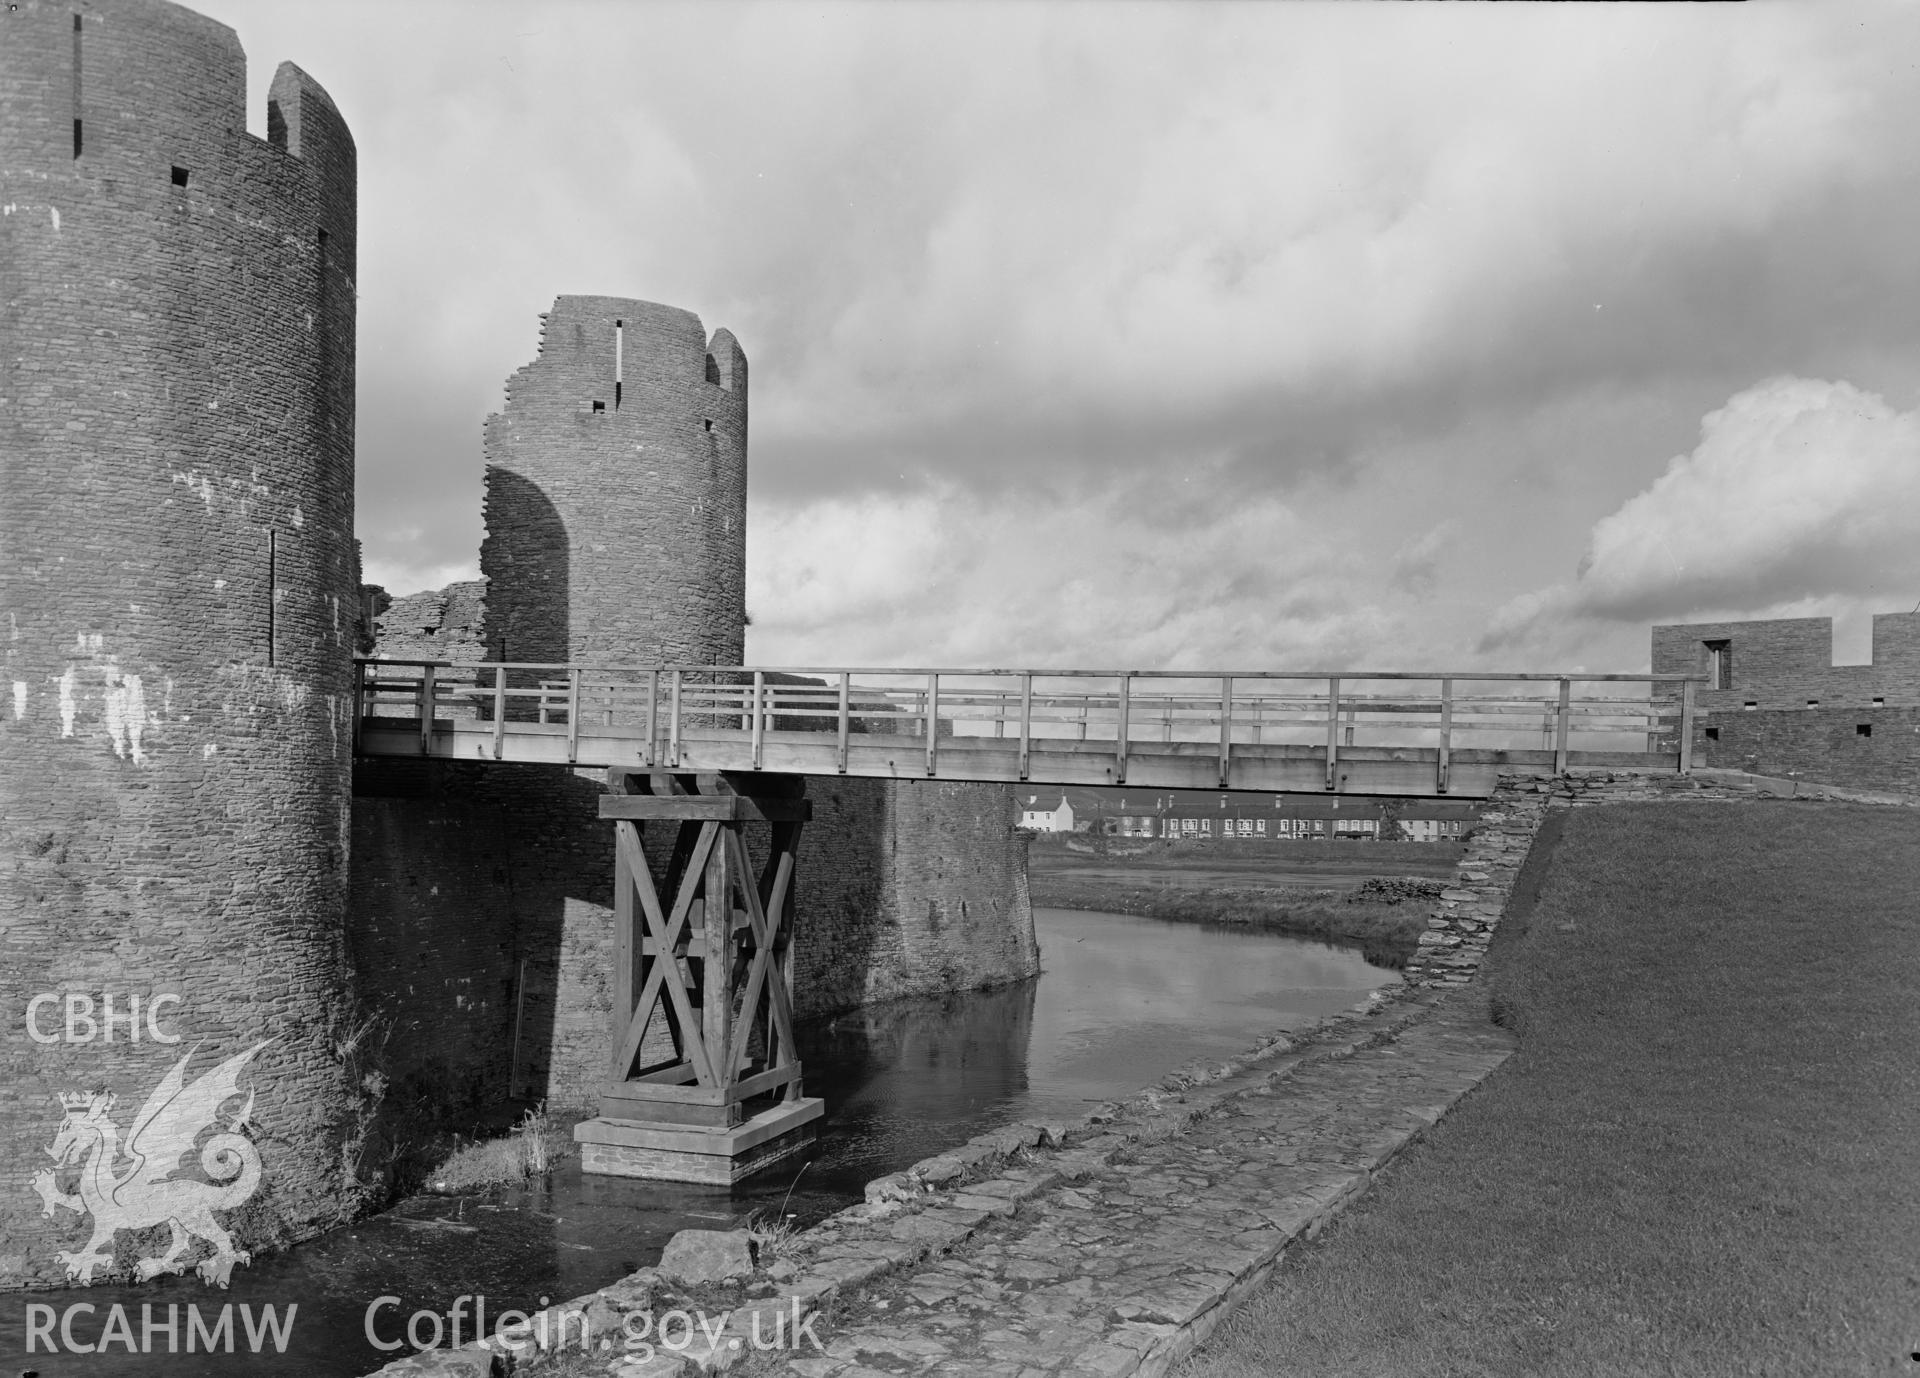 D.O.E photograph of Caerphilly Castle - east bridge over inner moat, from the south.